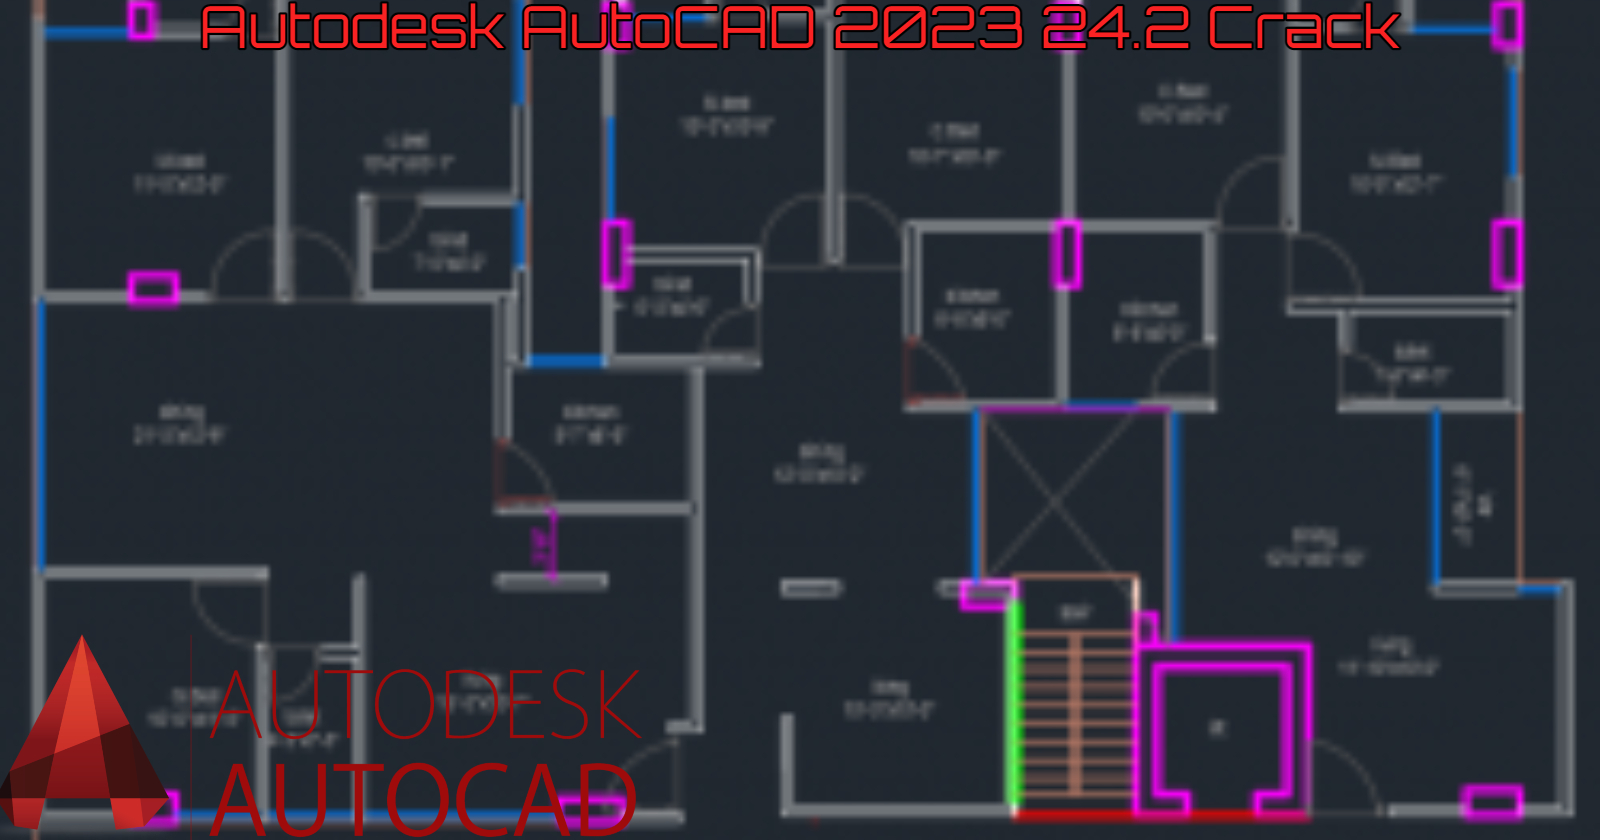 You are currently viewing Autodesk AutoCAD 2023 24.2 Crack